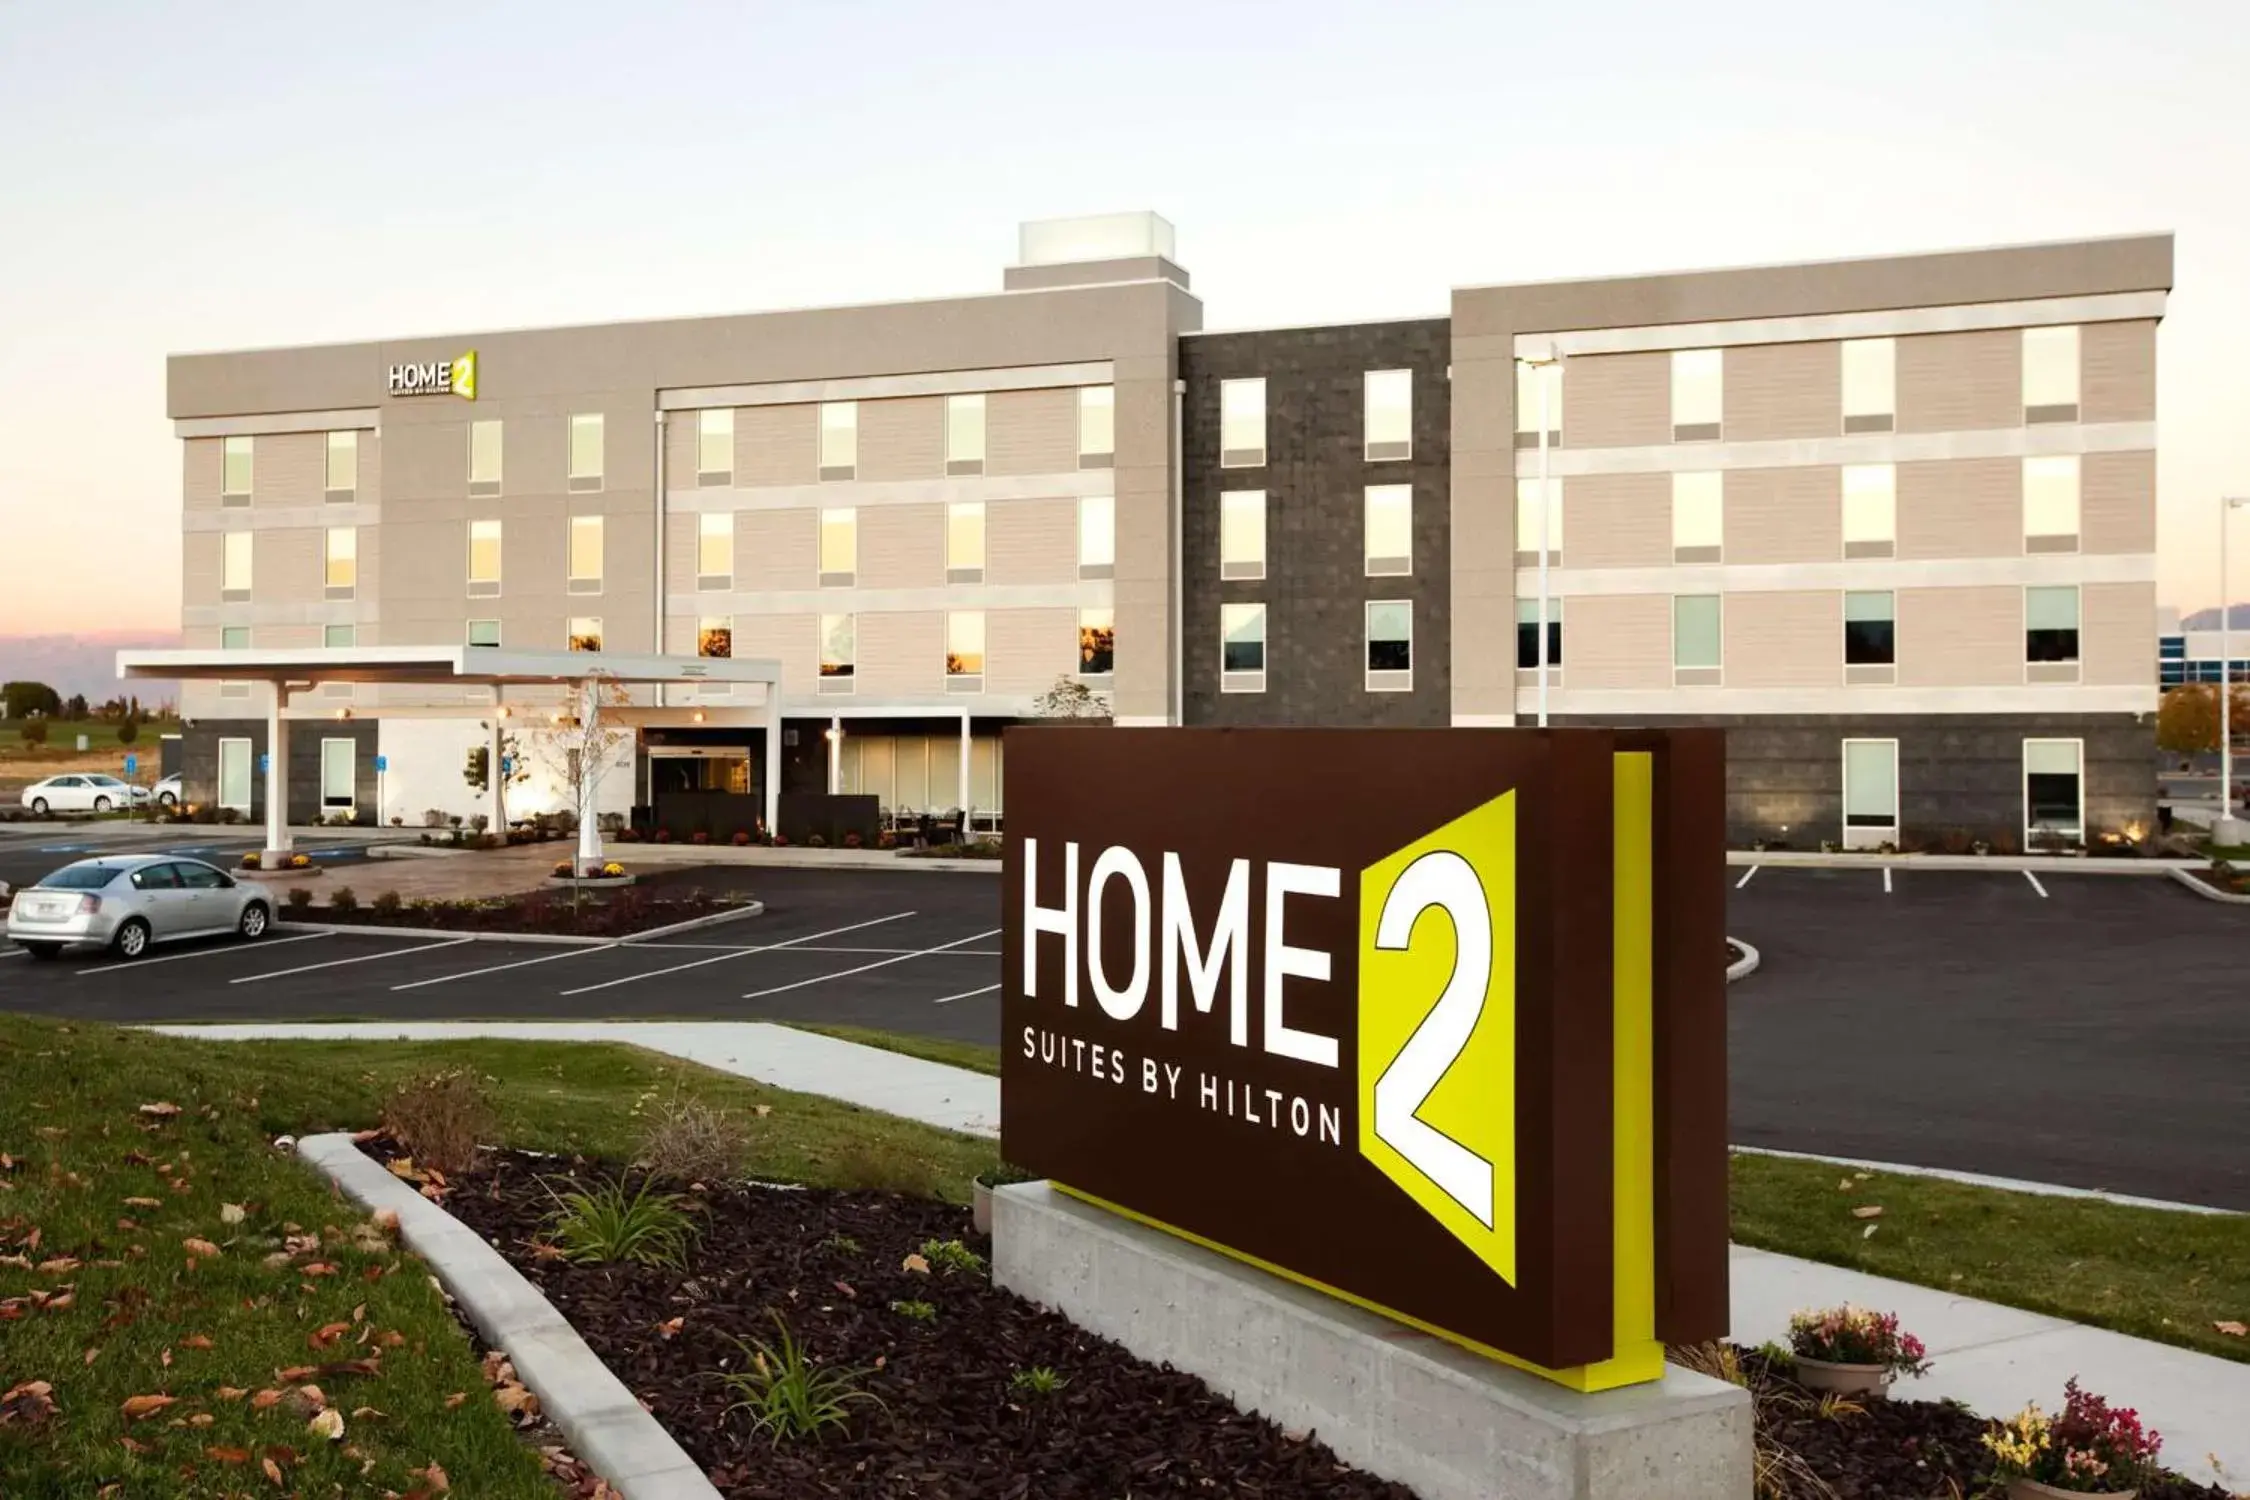 Property Building in Home2 Suites By Hilton Slc West Valley City Ut